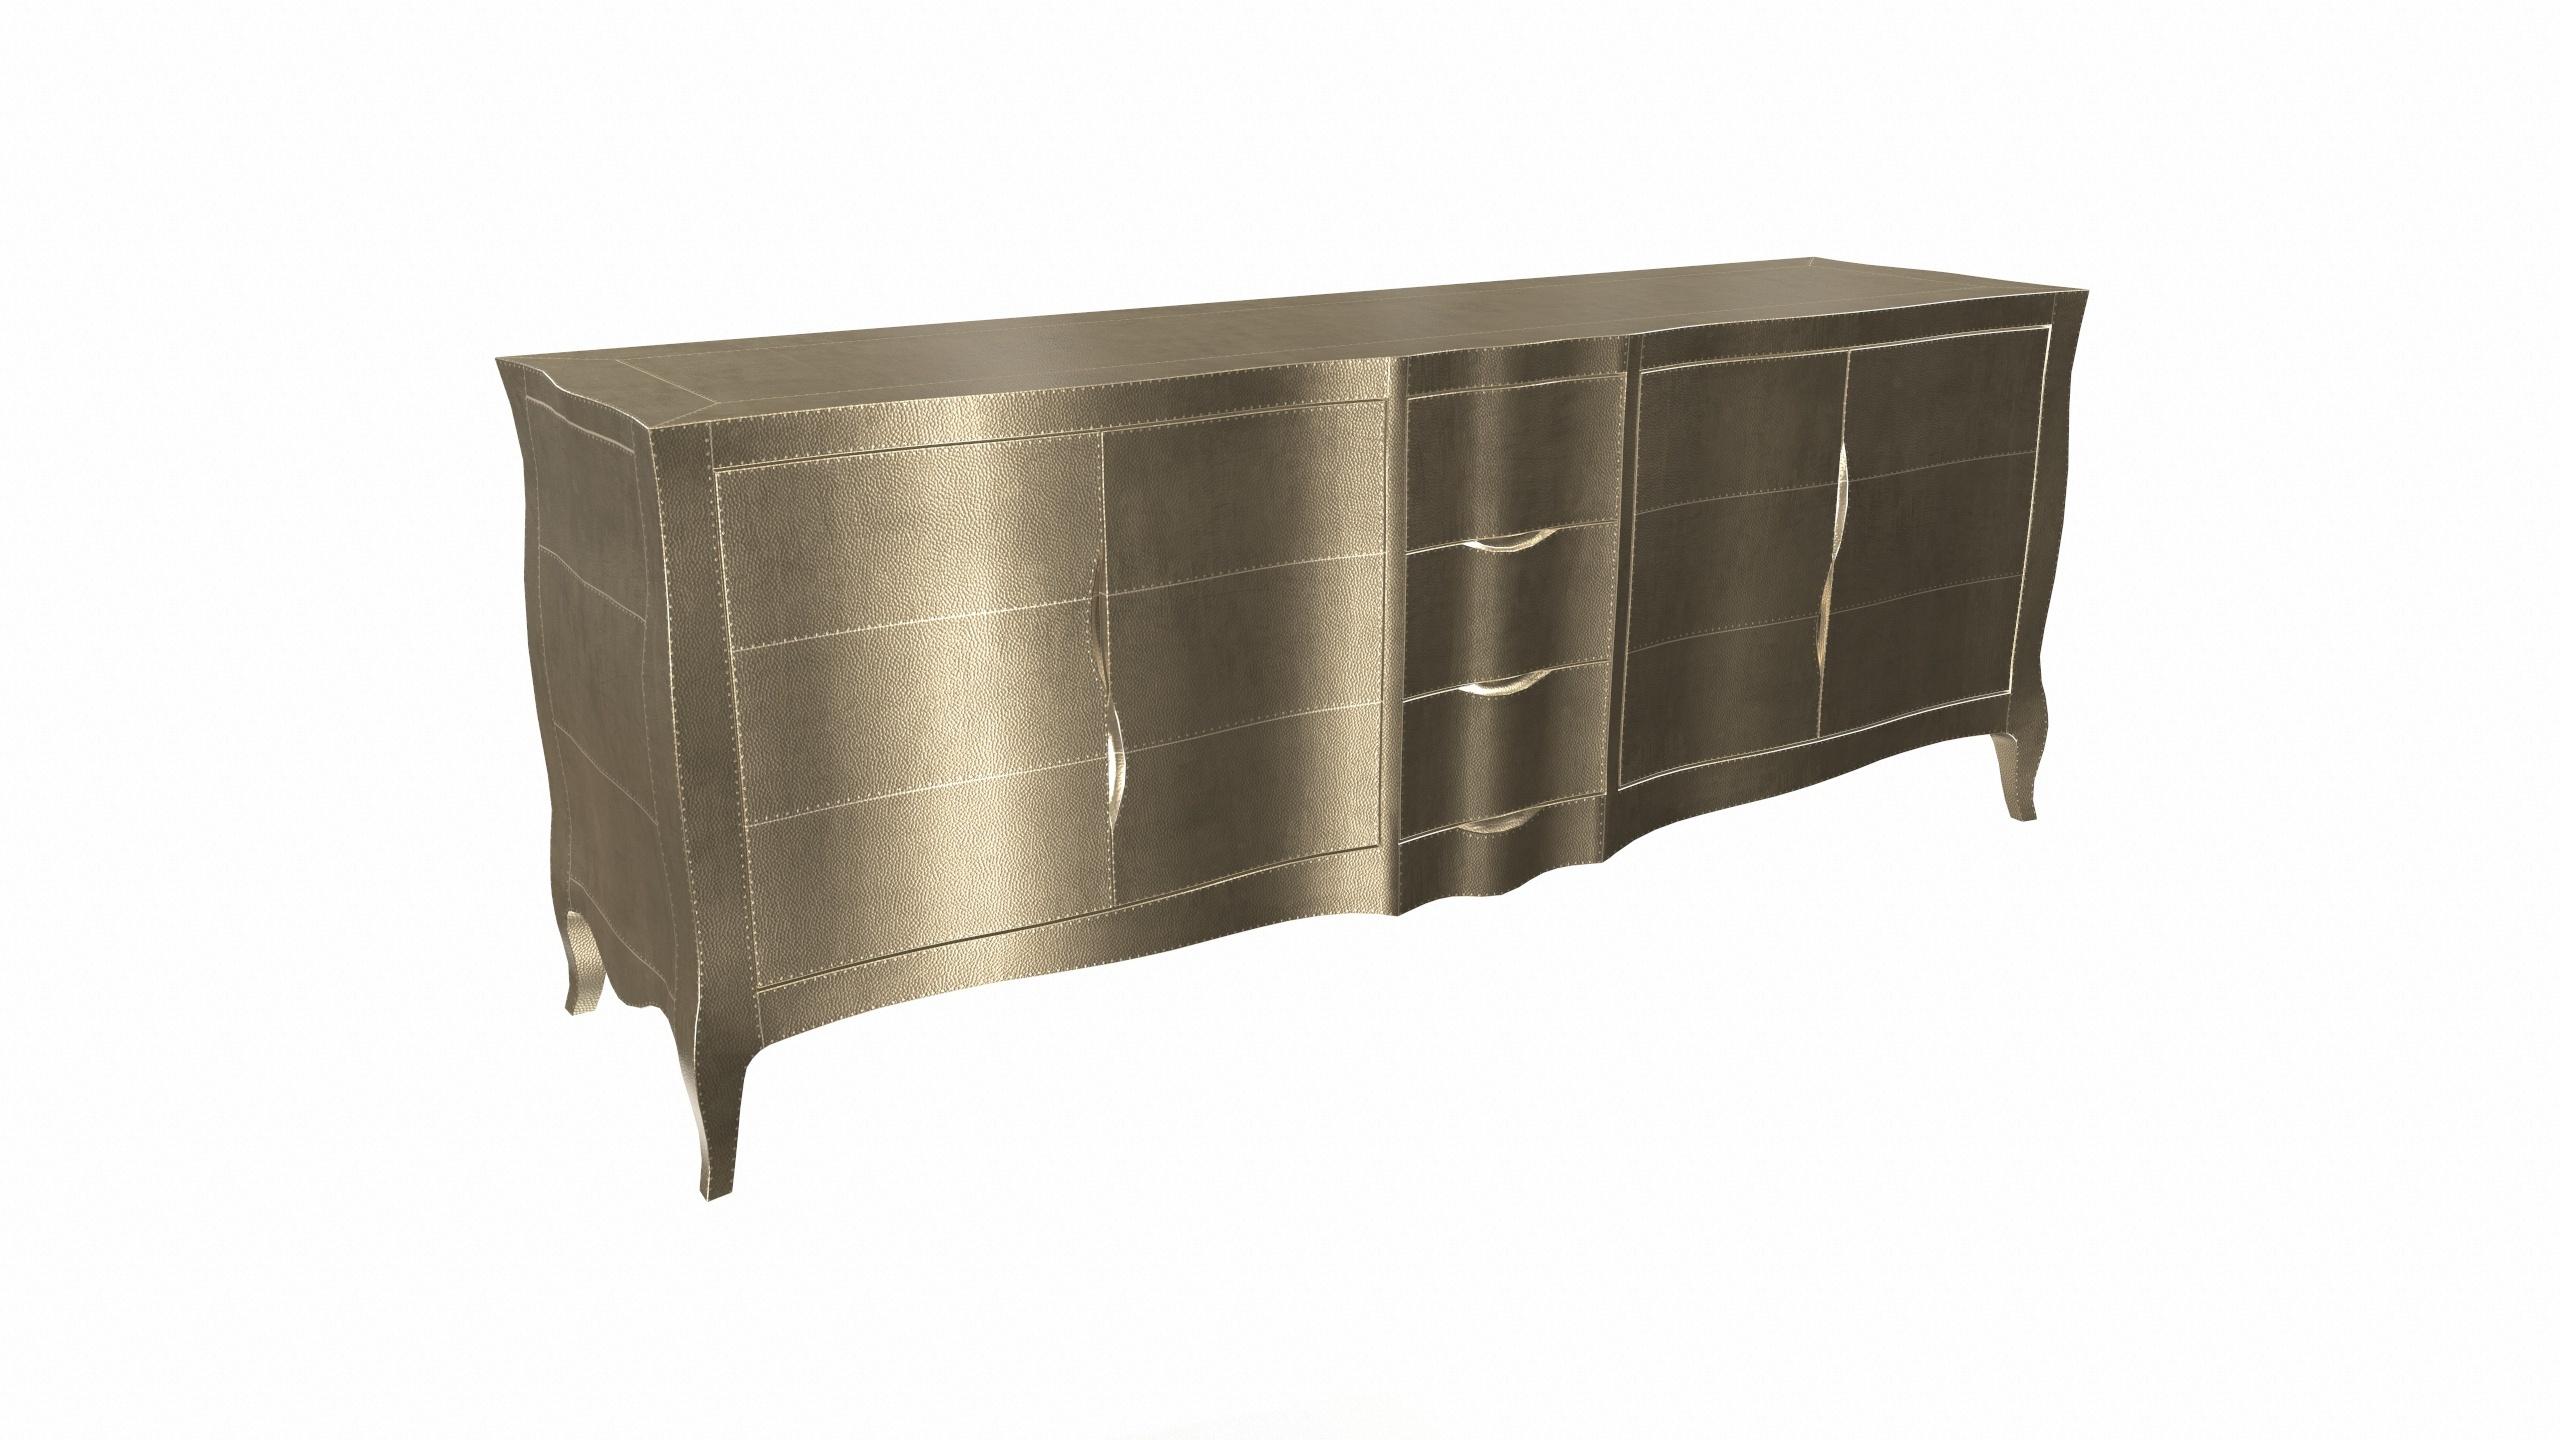 Contemporary Louise Credenza Art Deco Credenzas in Mid. Hammered Brass by Paul Mathieu For Sale